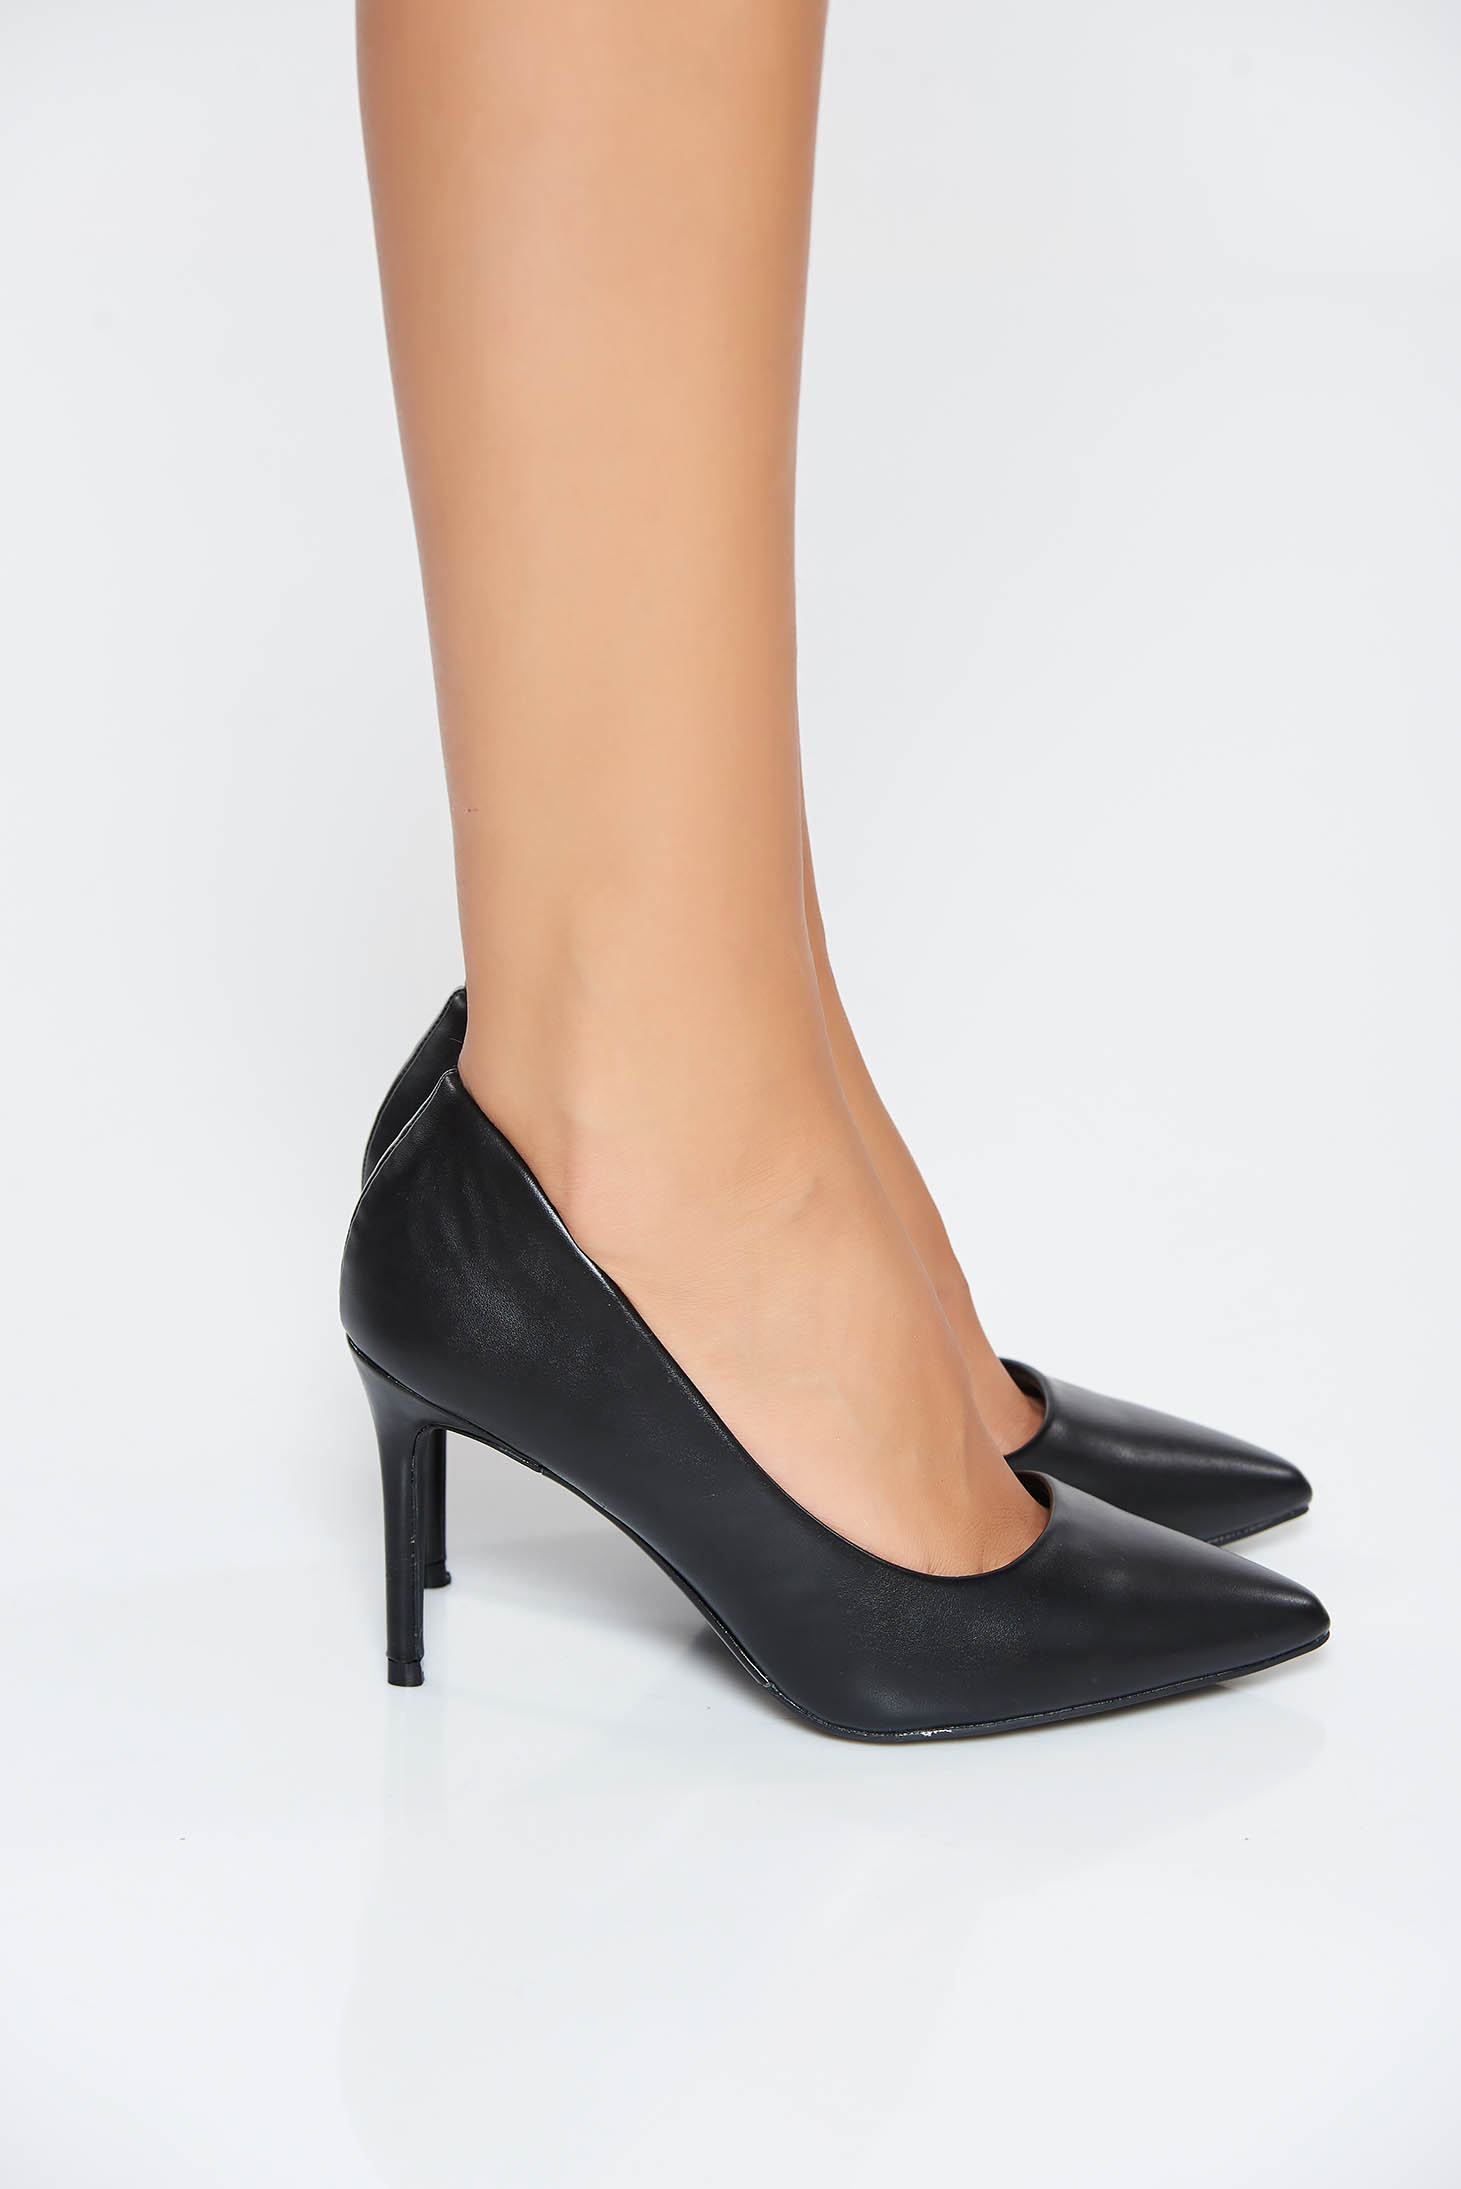 Black with high heels shoes slightly pointed toe tip